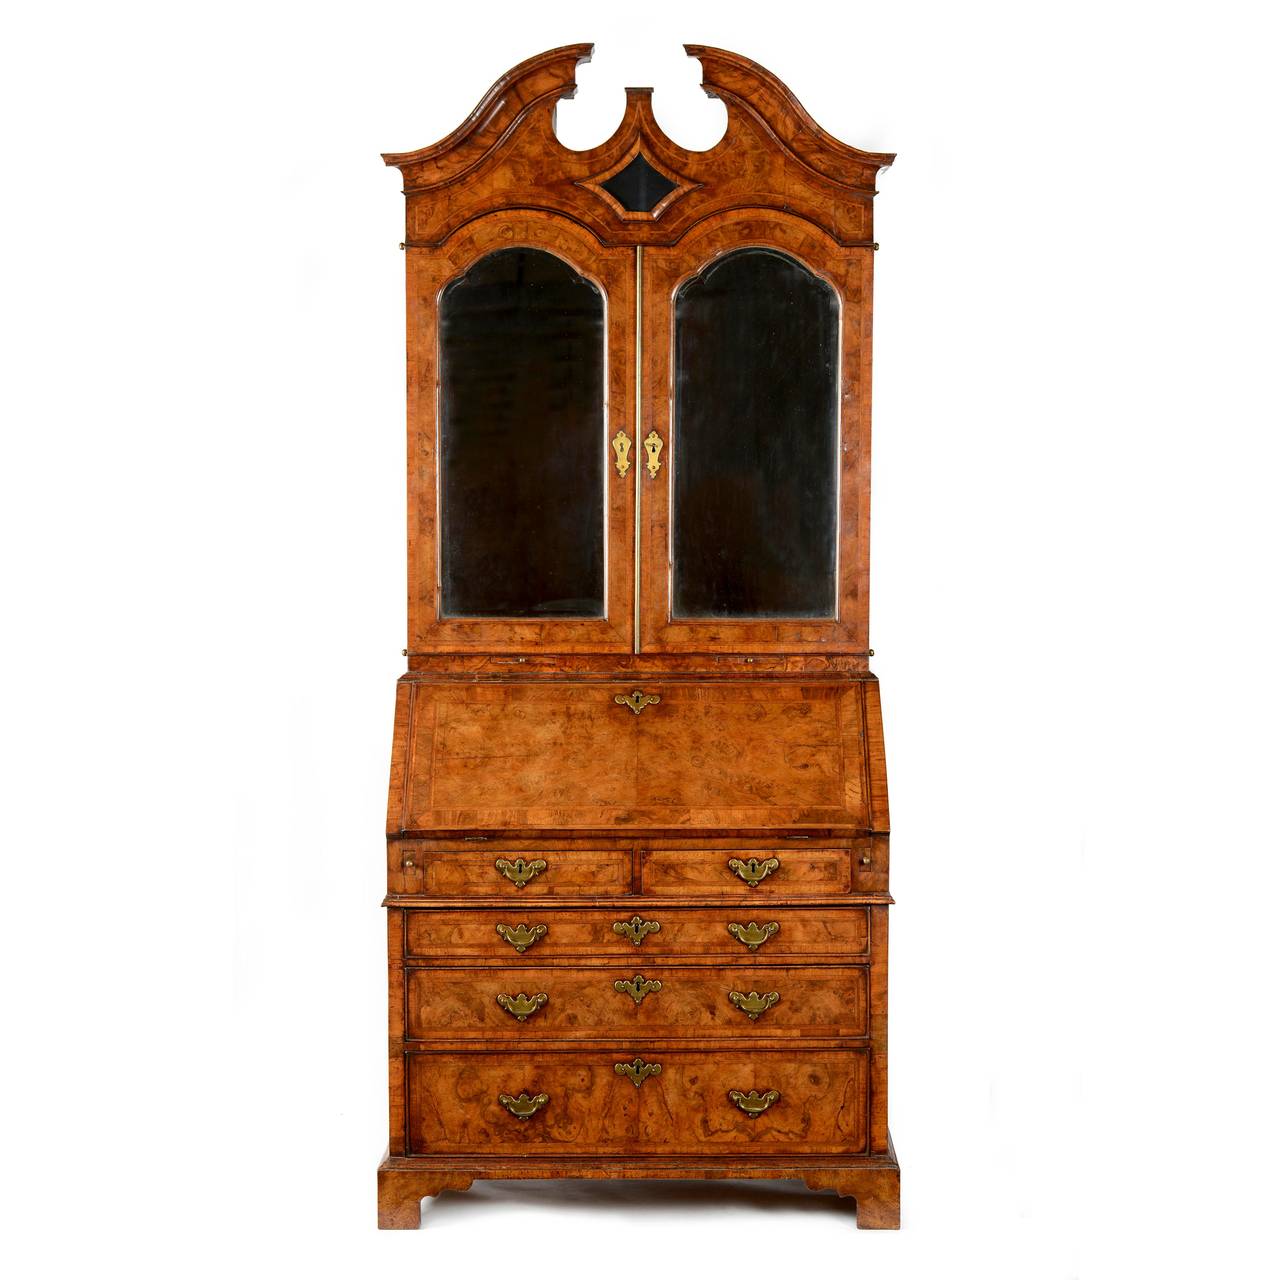 A fine George I figured walnut & feather banded bureau bookcase. The bookcase section with swan neck pediment, of shaped cavetto section, cross & feather banded with and inset glass lozenge panel set within a bold cross grain moulding. The